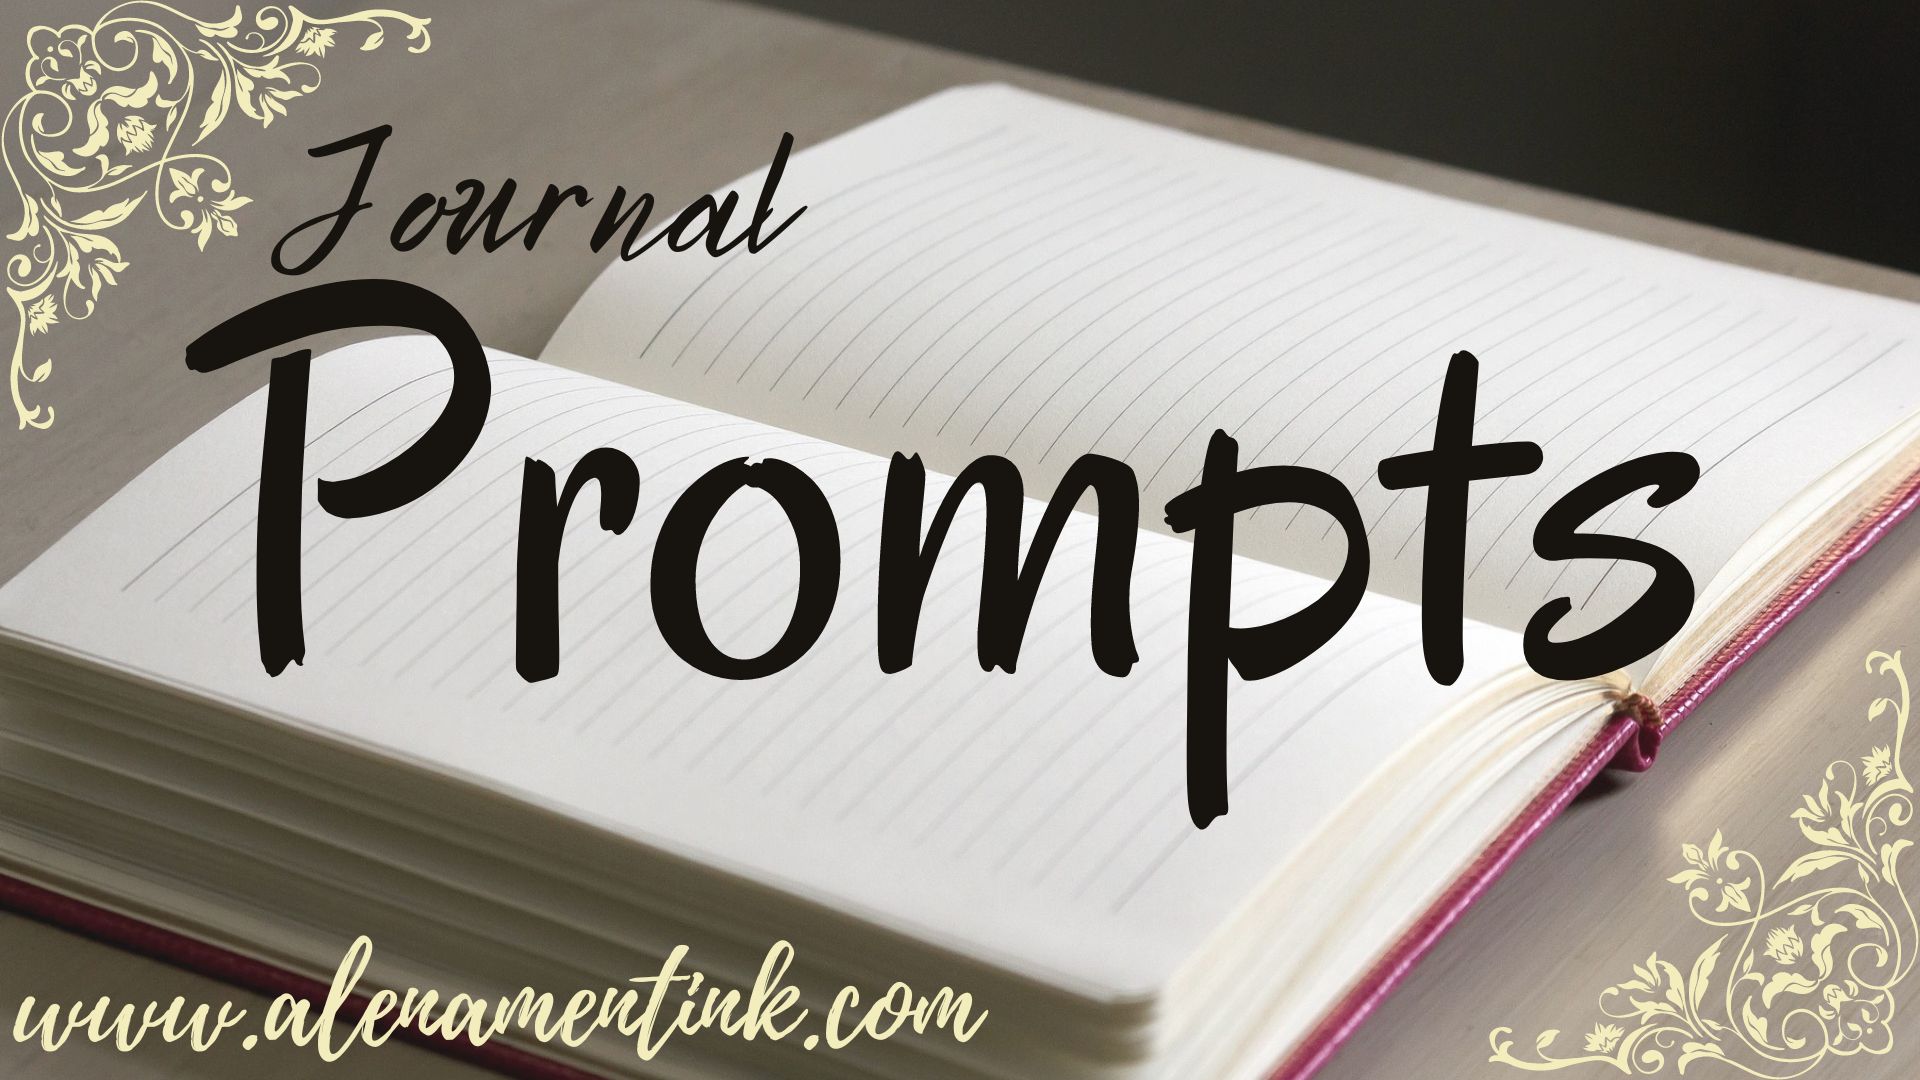 Journal Prompts to Give Your Diary a Jump-Start - Alena Mentink